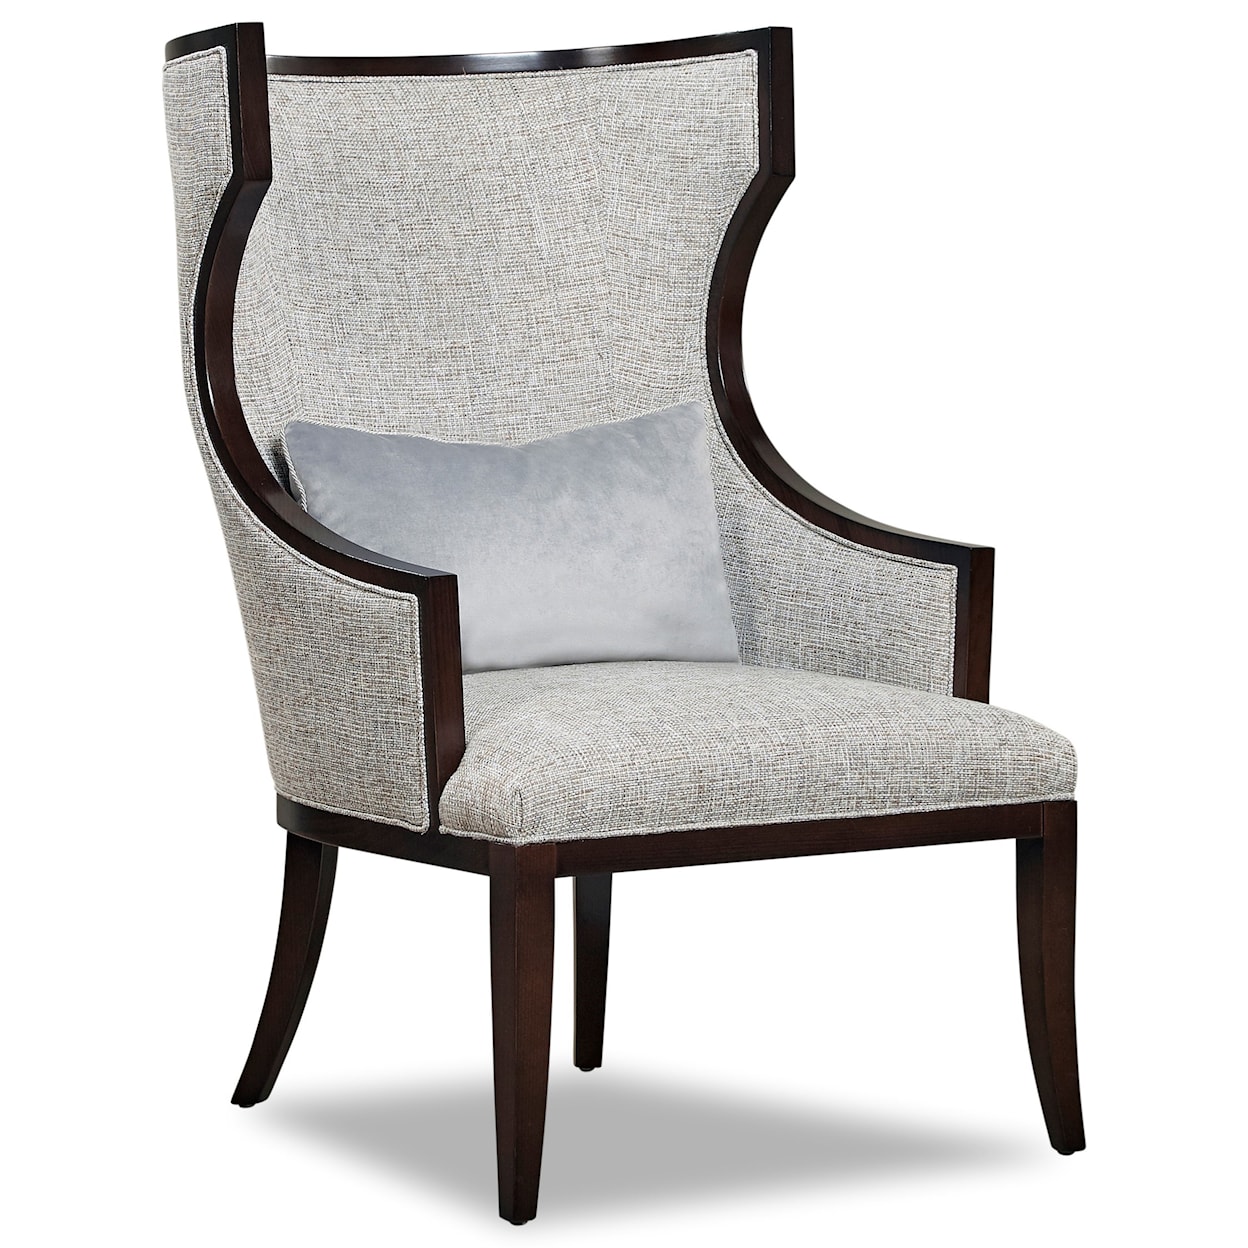 Huntington House 6125 Exposed Wood Accent Chair